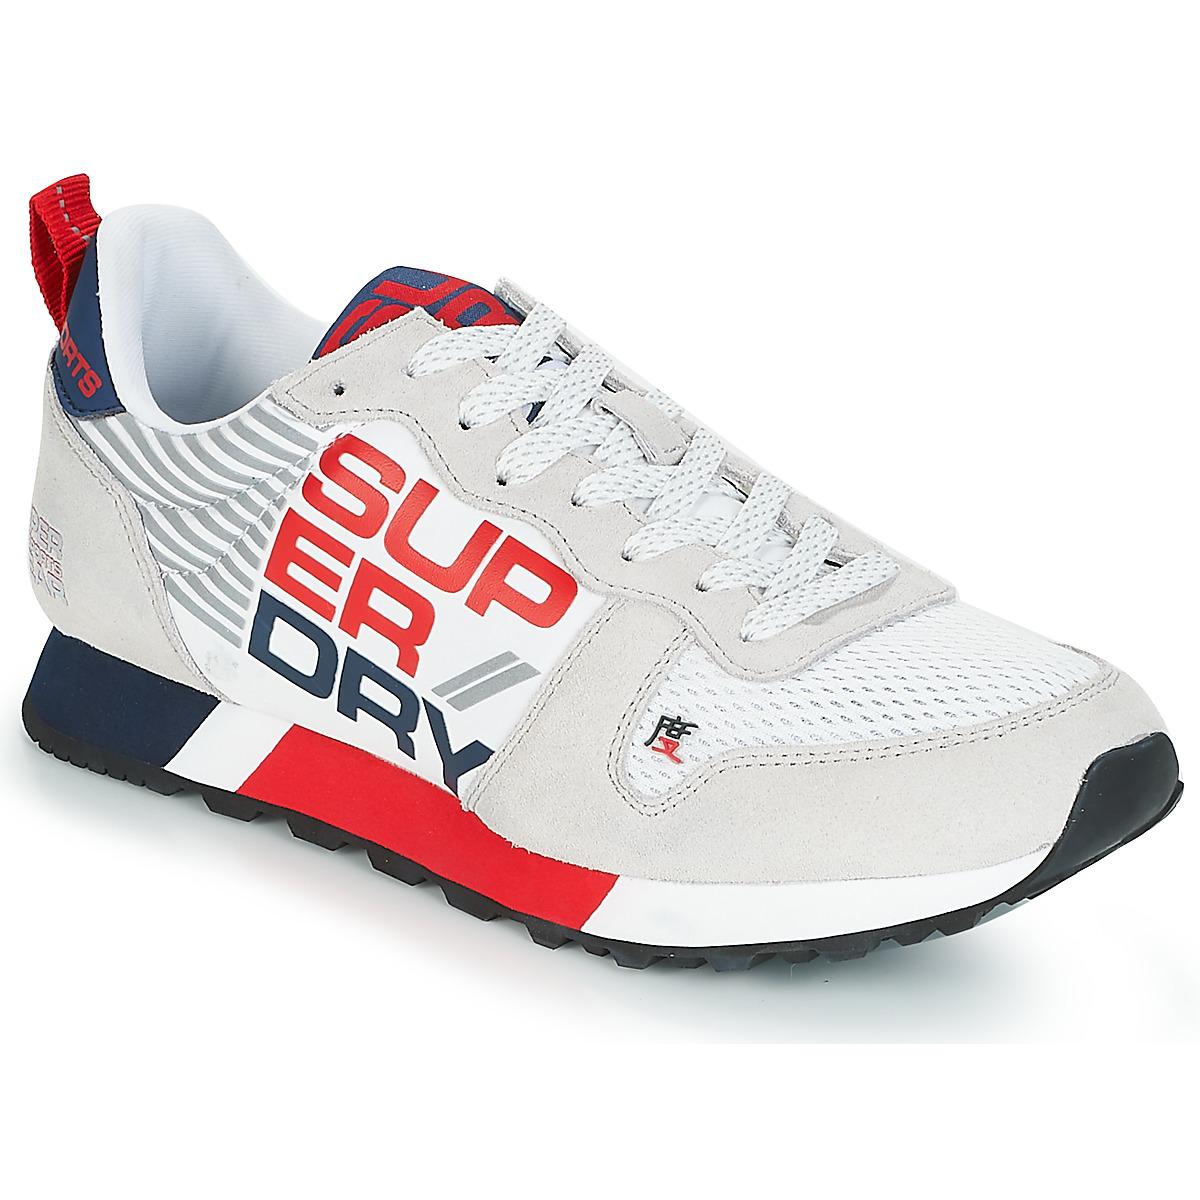 superdry mens sneakers on sale 609d9 db35e